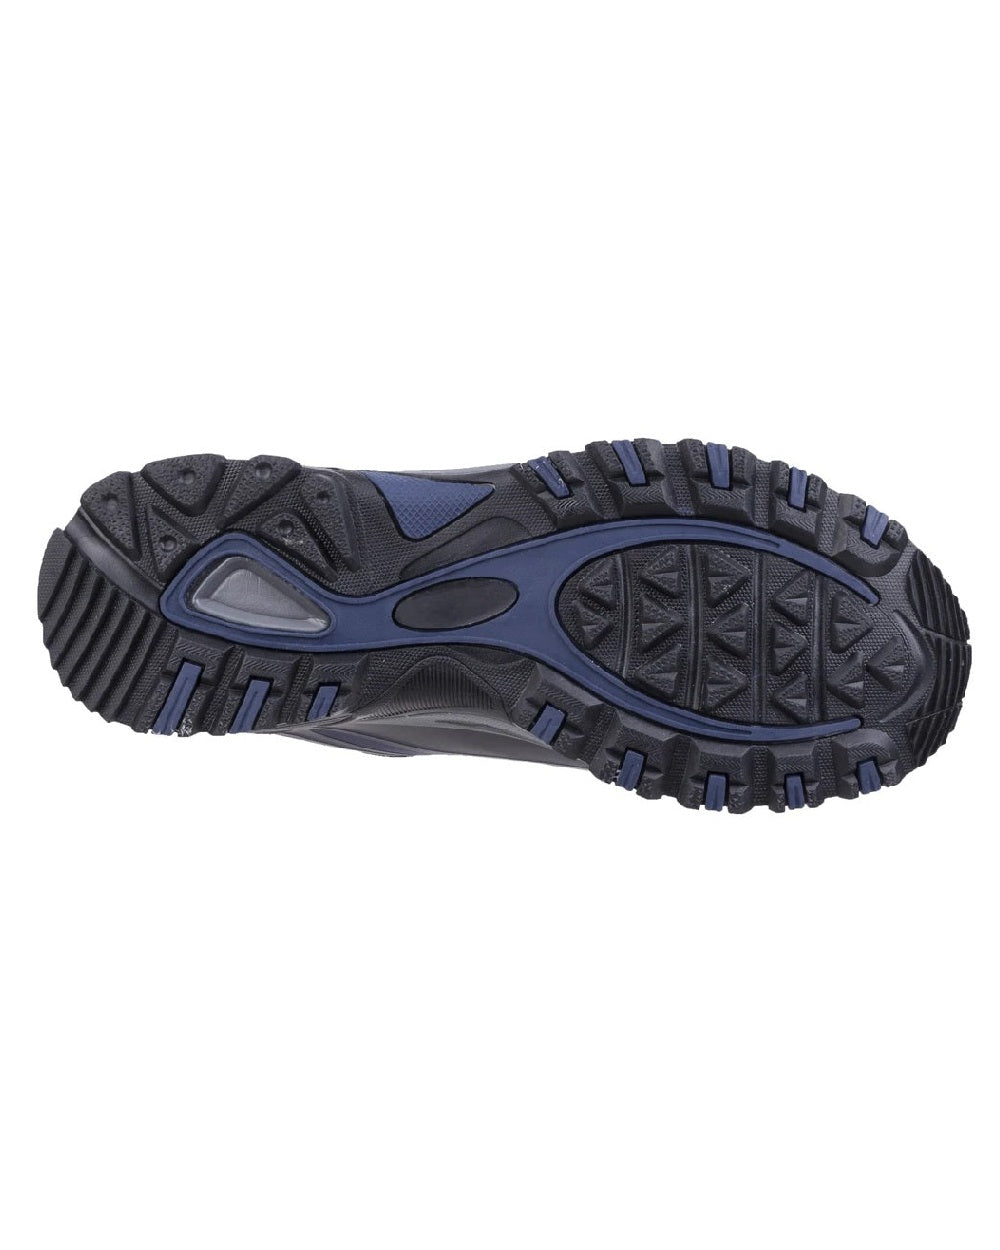 Blue/Black/Grey coloured Cotswold Mens Abbeydale Low Hiking Shoes on white background 